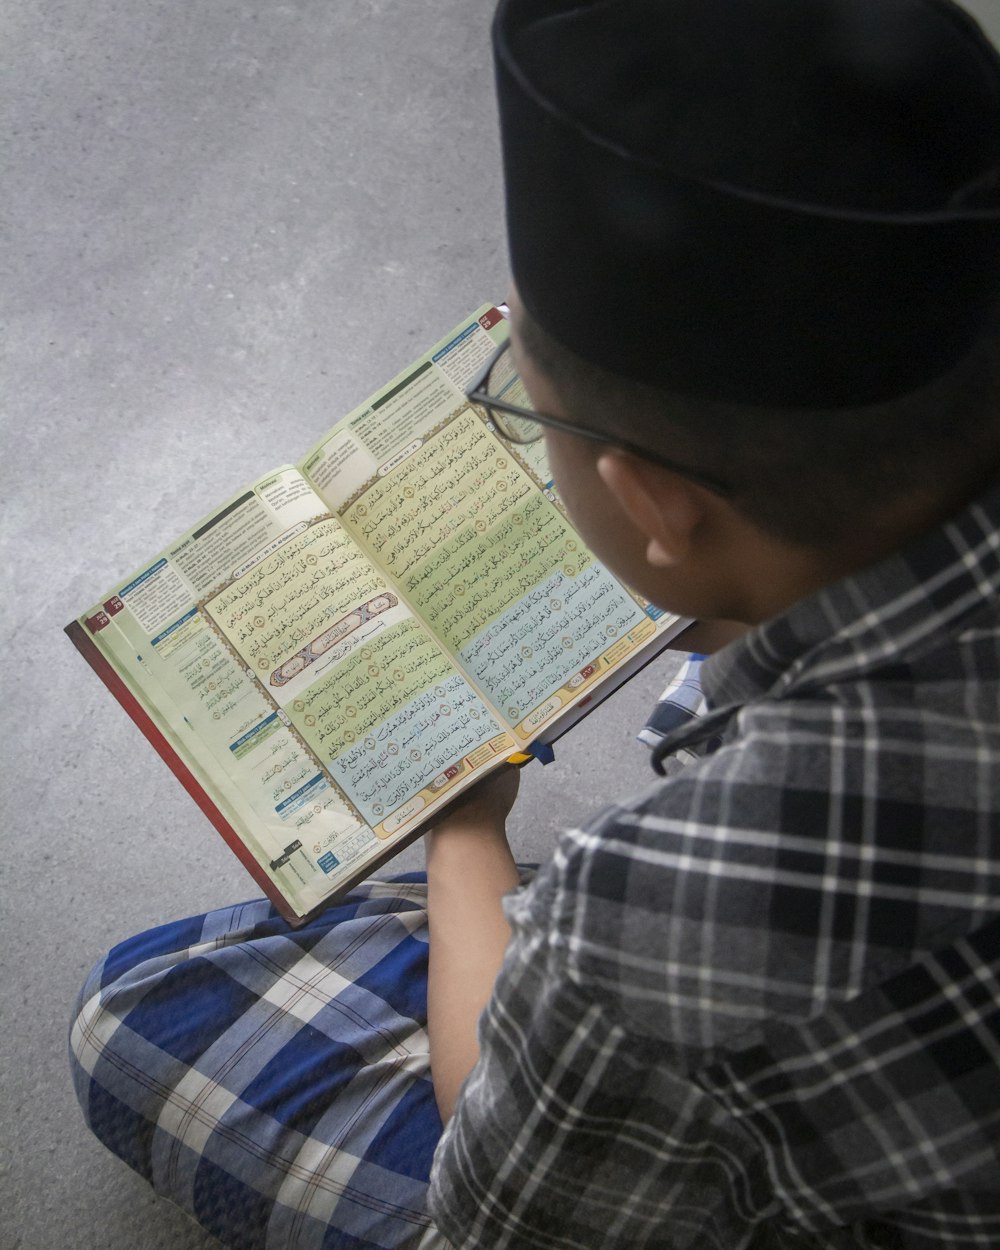 a young boy sitting on the floor reading a book